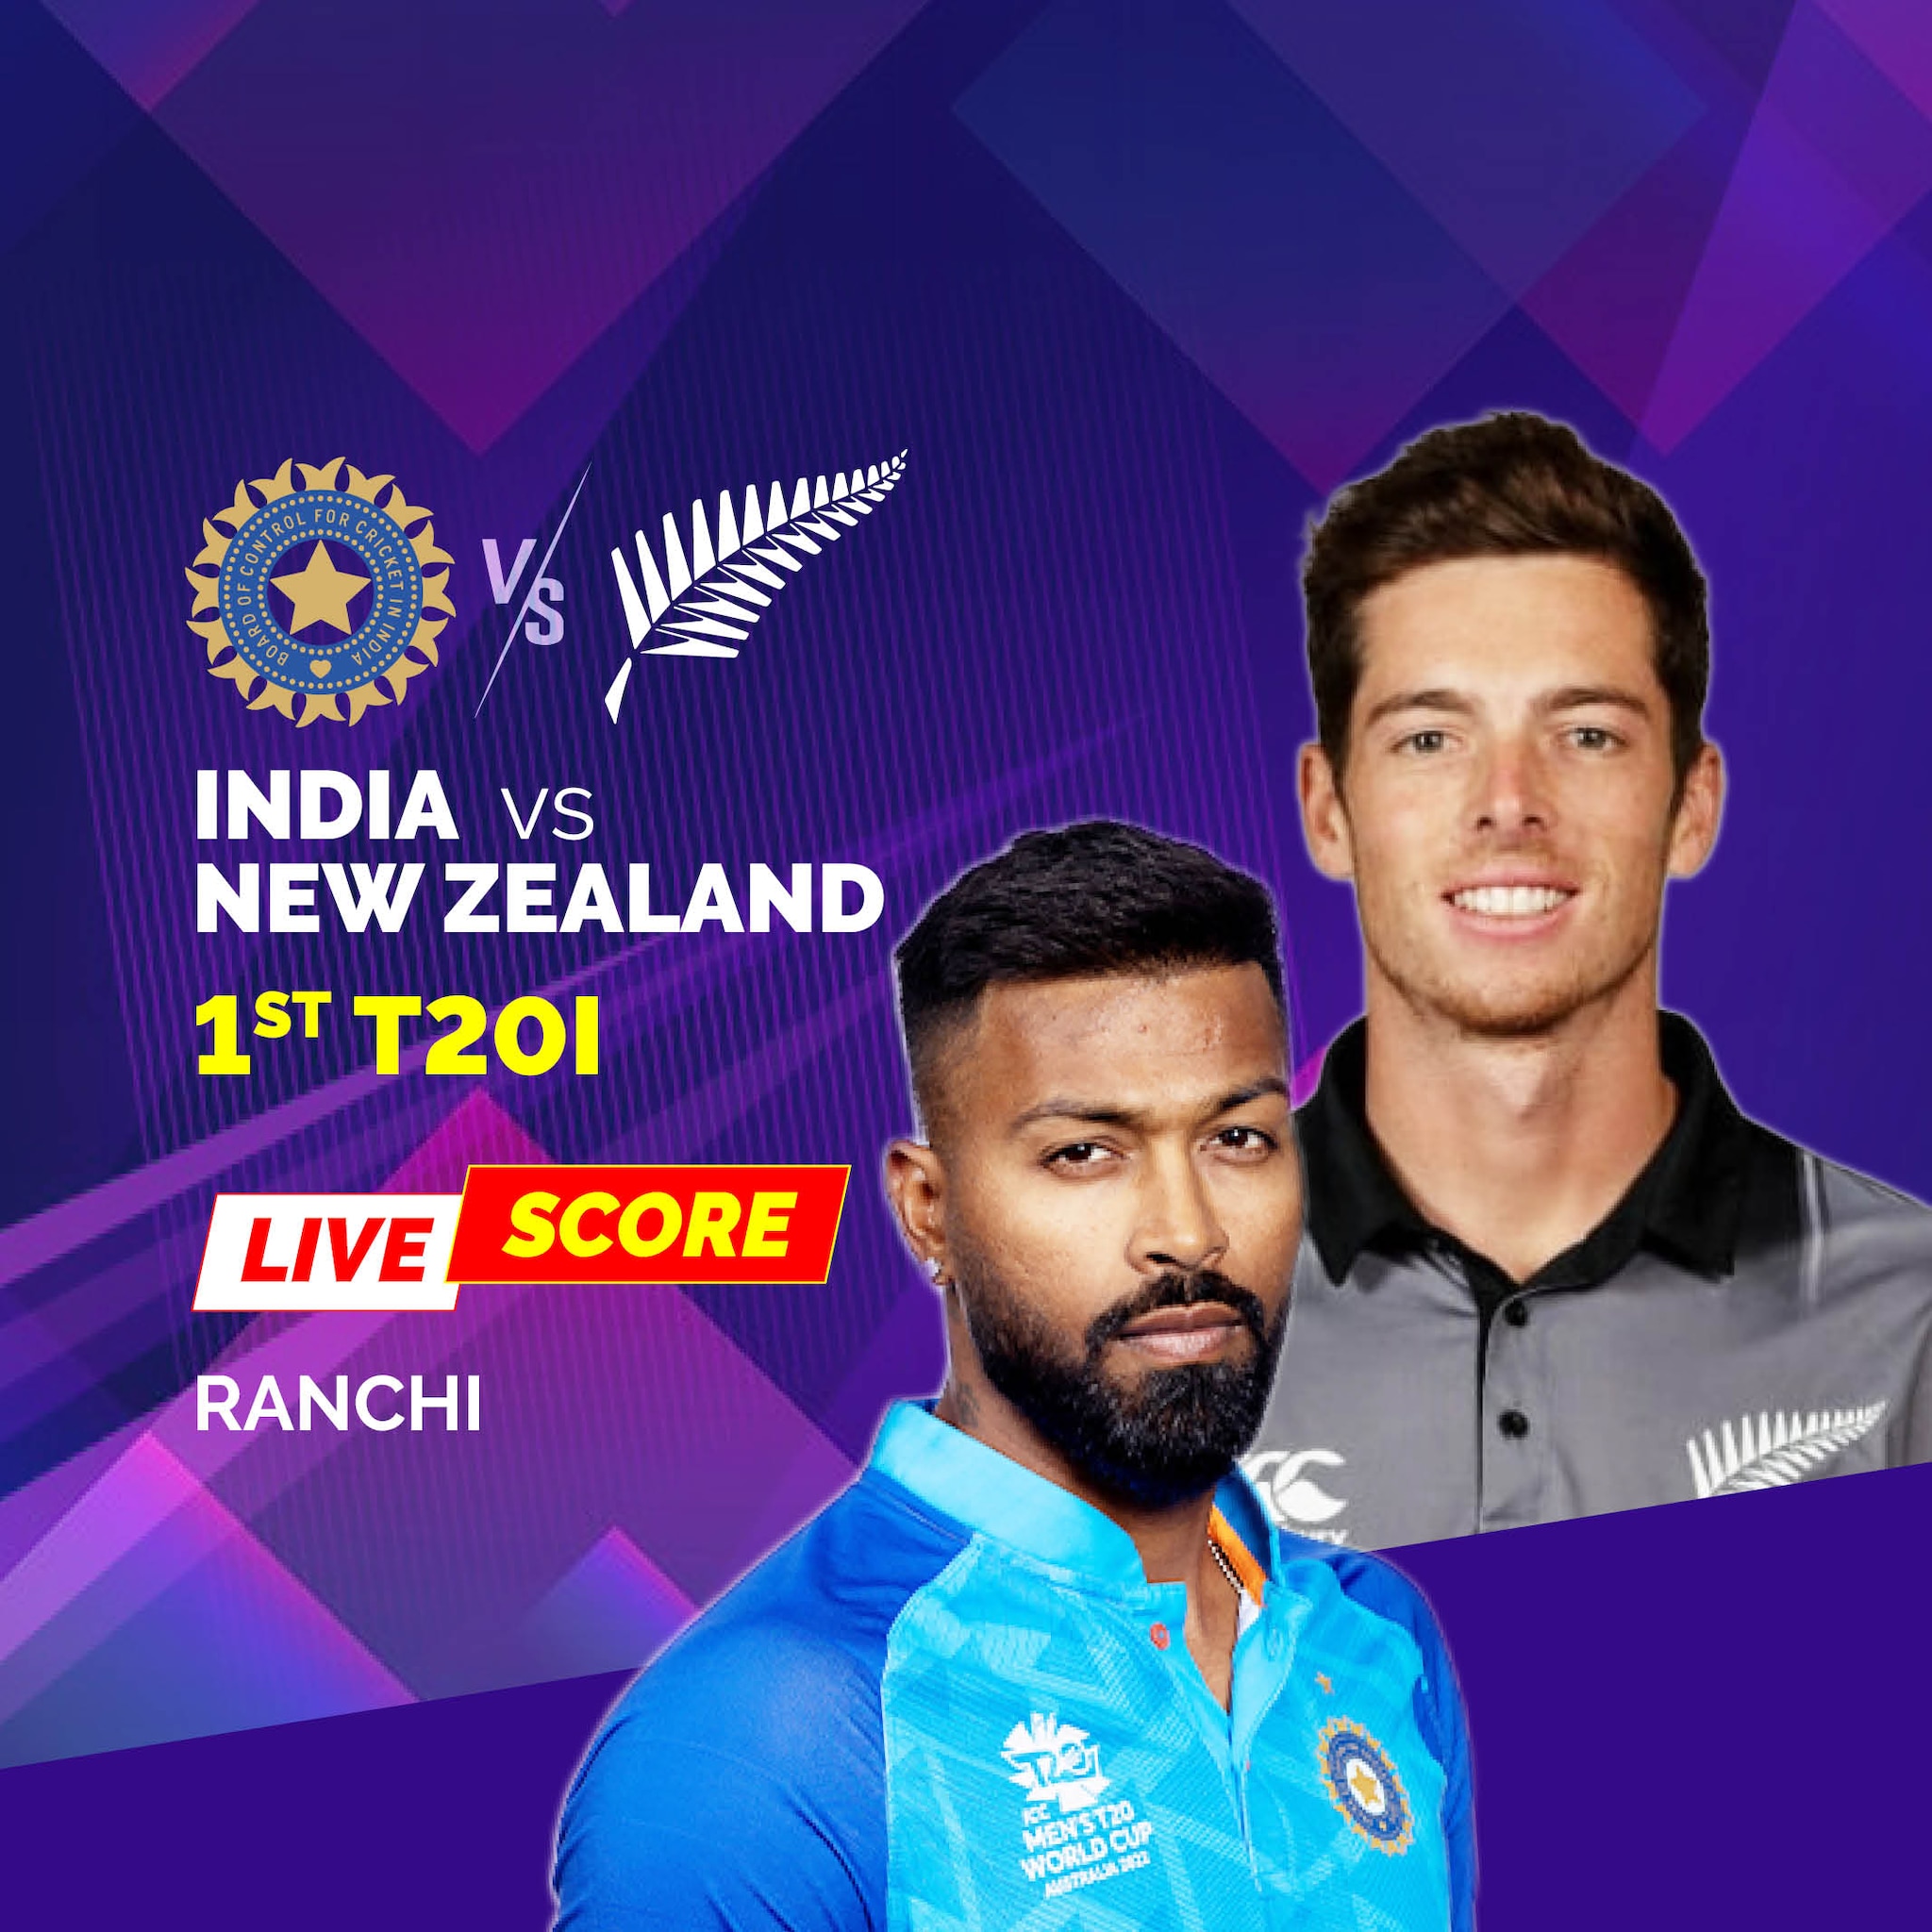 India vs New Zealand 1st T20I Highlights New Zealand Beat India by 21Runs to go 1-0 up in the Series